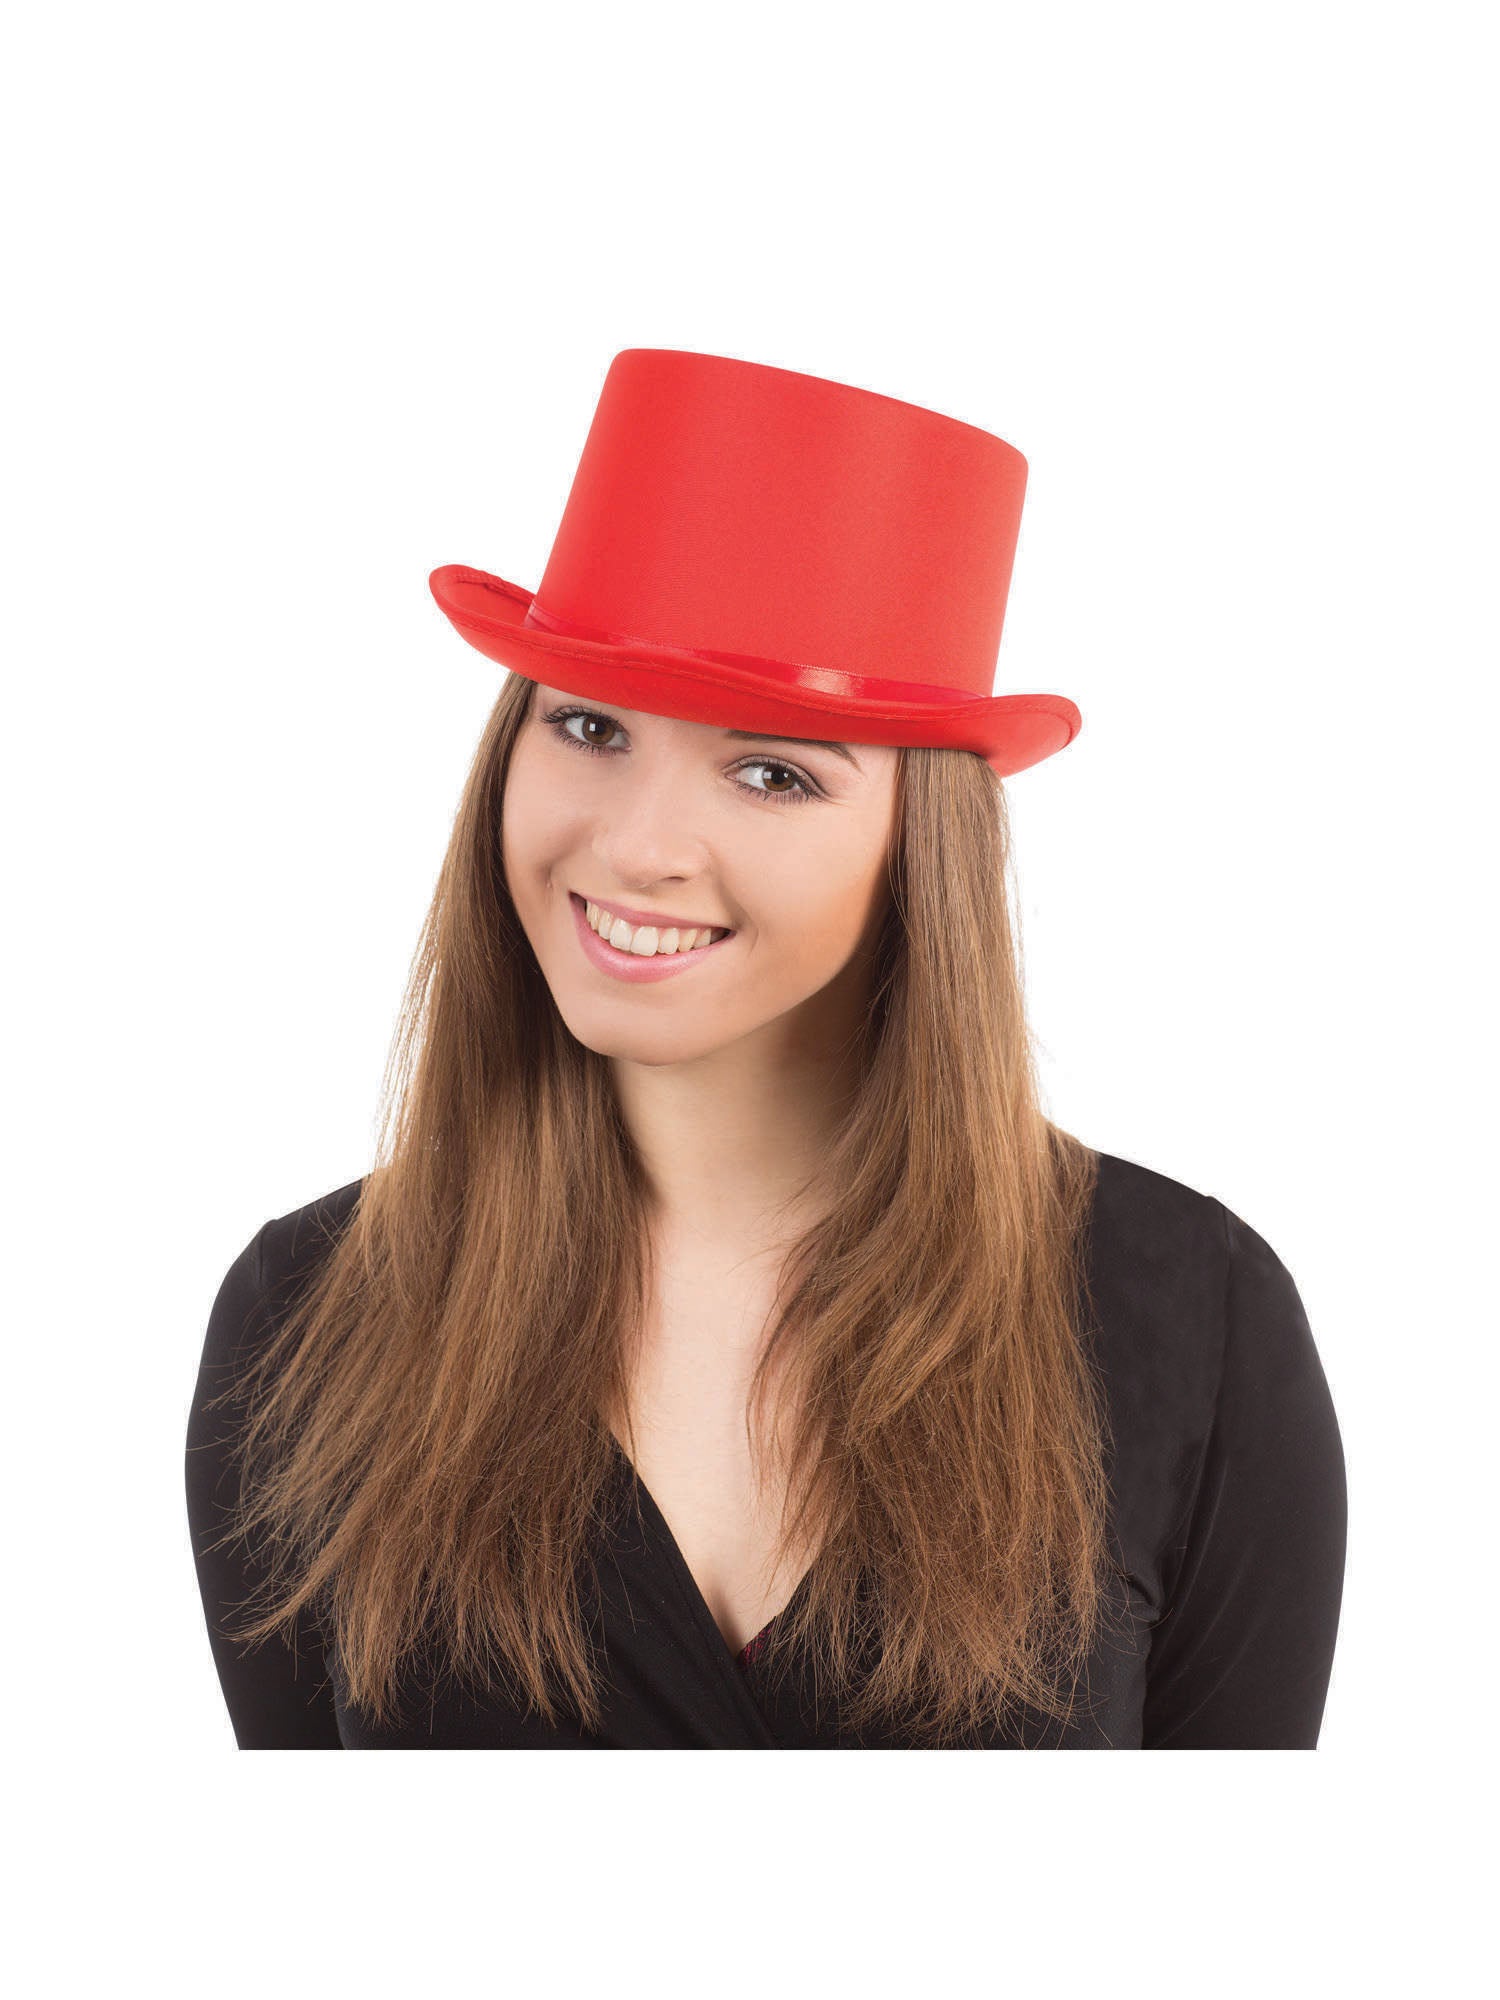 Top Hat, Red, Generic, Hat, One Size, Front